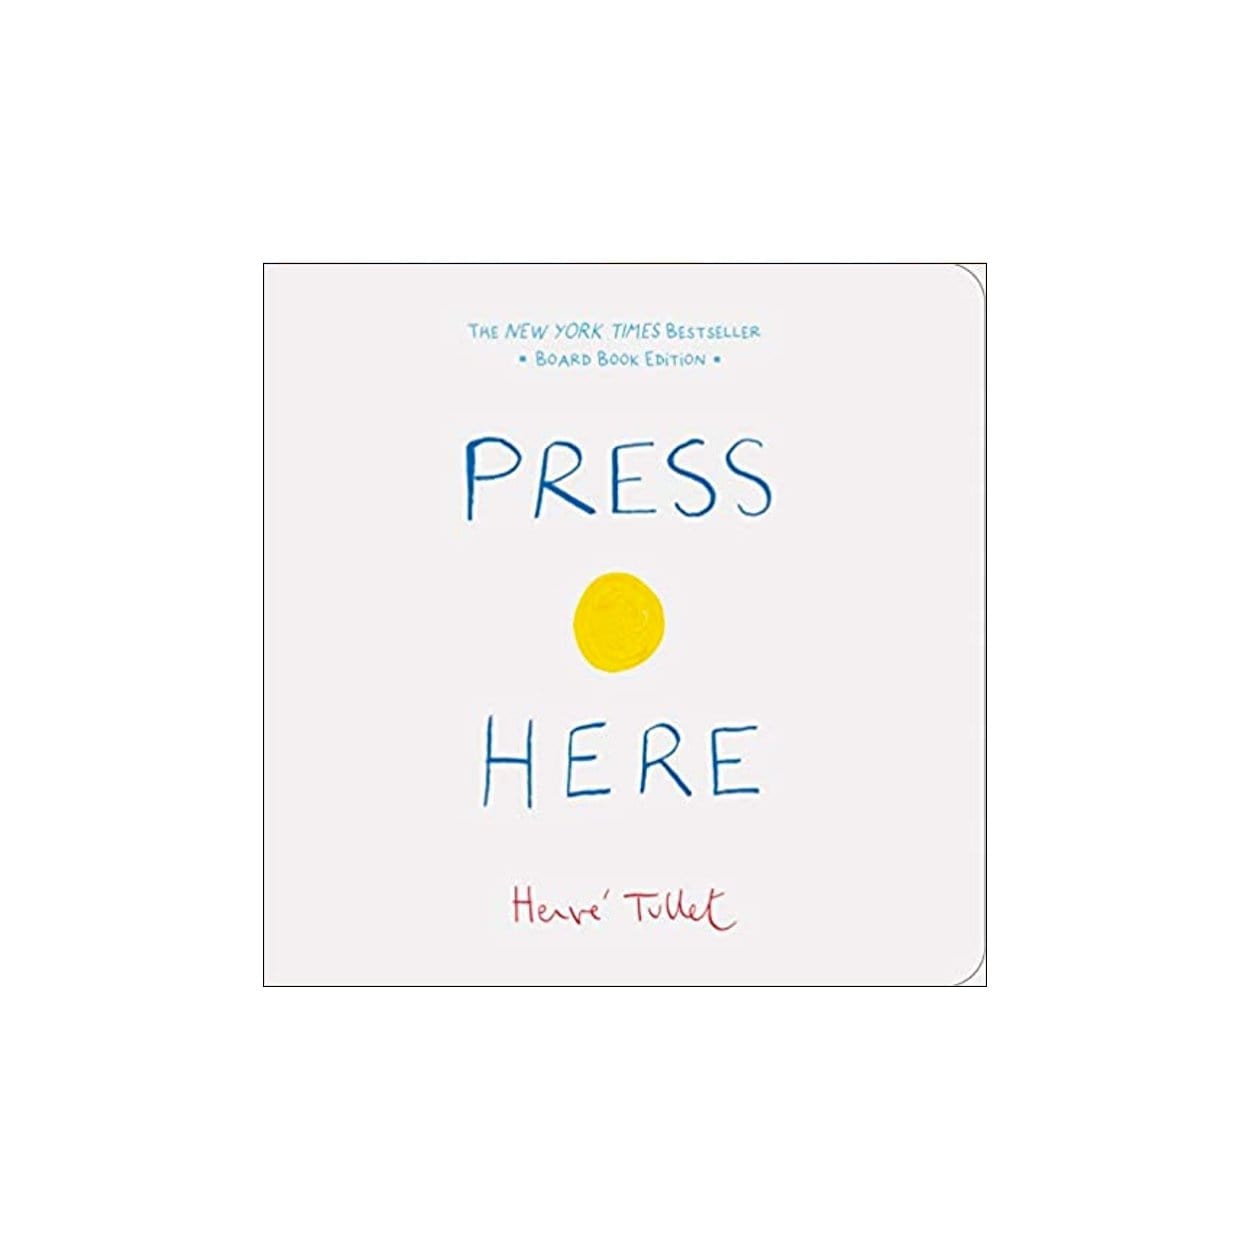 Press Here - The Montessori Room Herve Tullet, Toronto, Ontario, Canada, board books, children's books, bestselling children's books, interactive books, New York Times bestsellers, books about following instructions